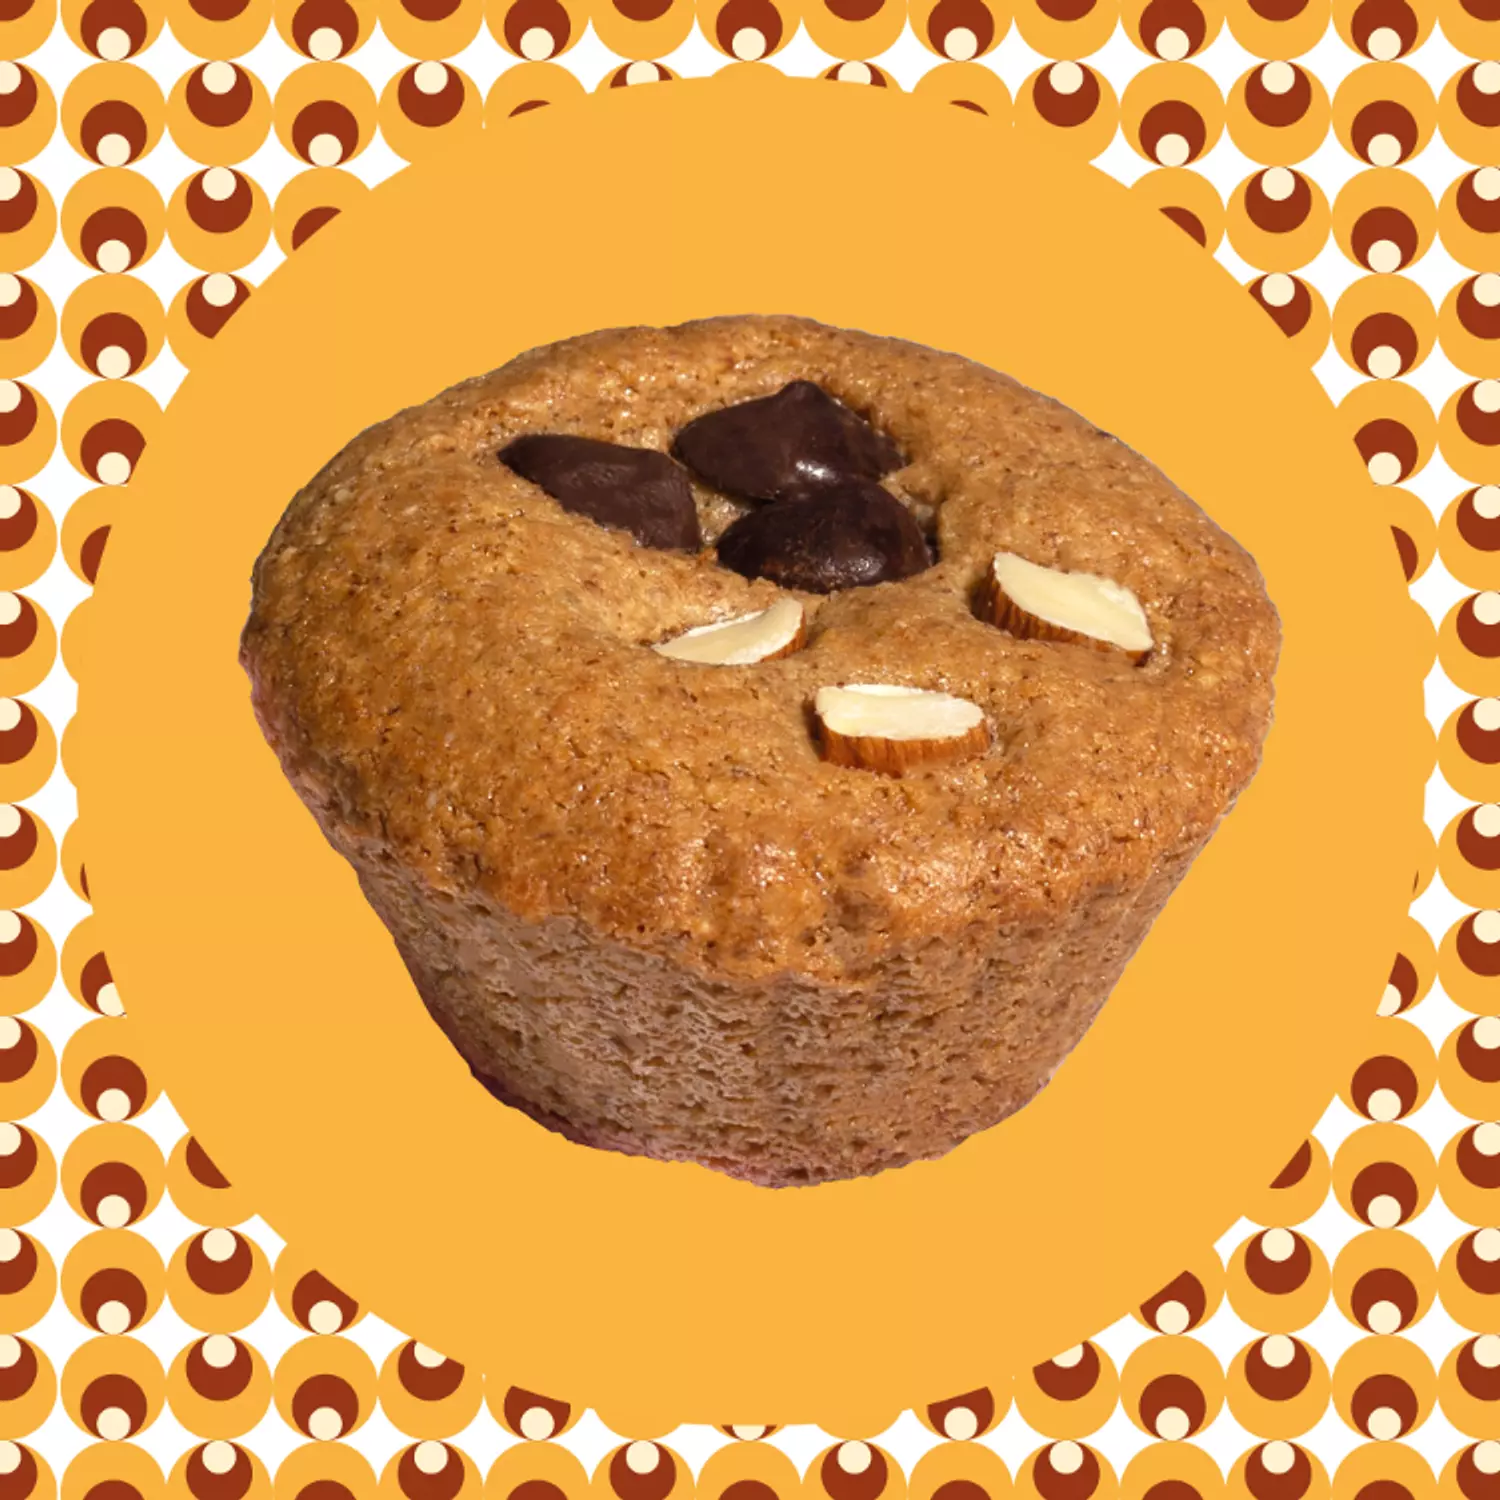 ROASTED ALMOND - GLUTEN FREE  hover image